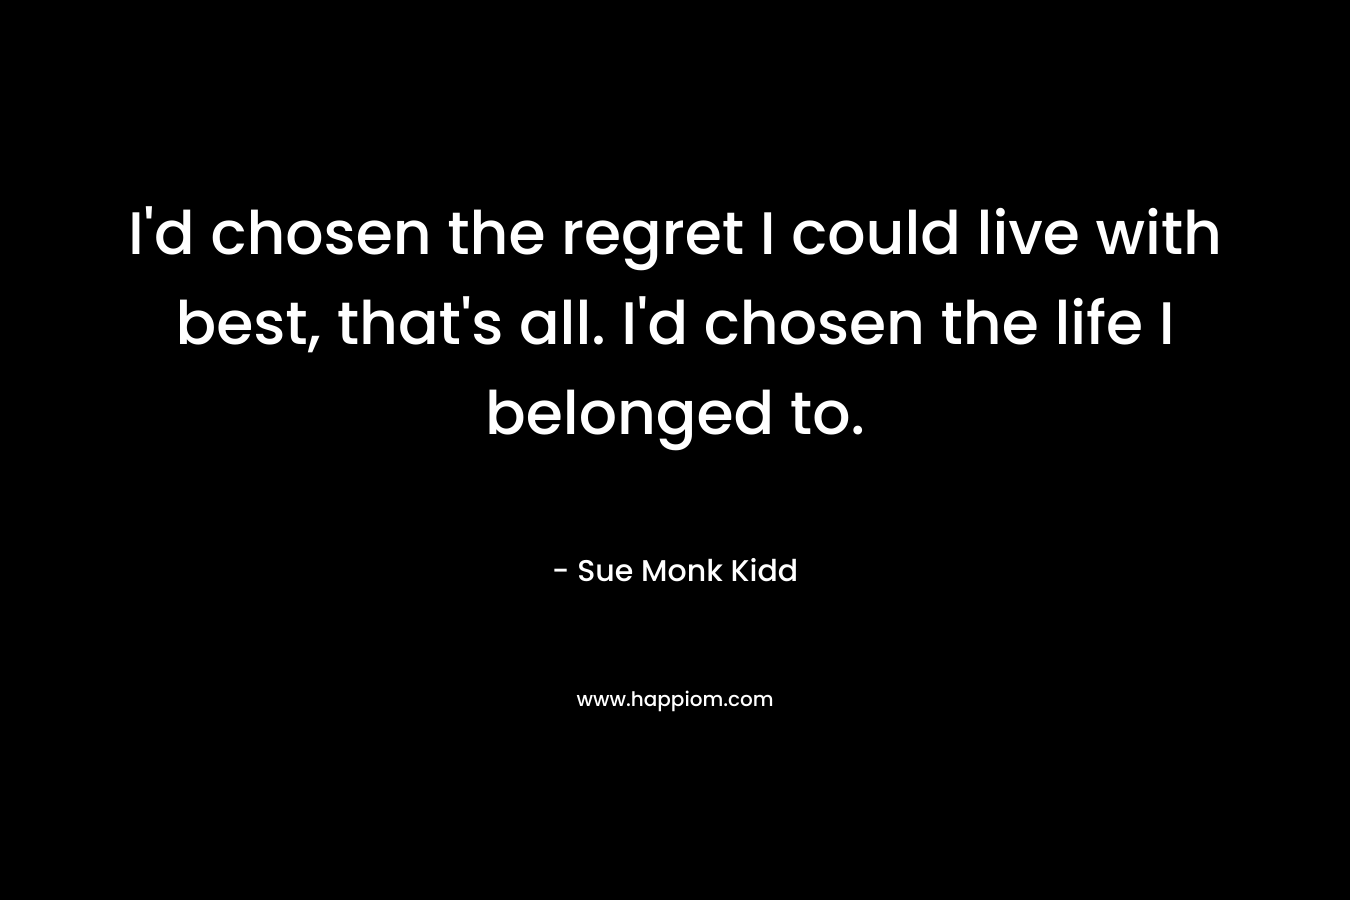 I’d chosen the regret I could live with best, that’s all. I’d chosen the life I belonged to. – Sue Monk Kidd